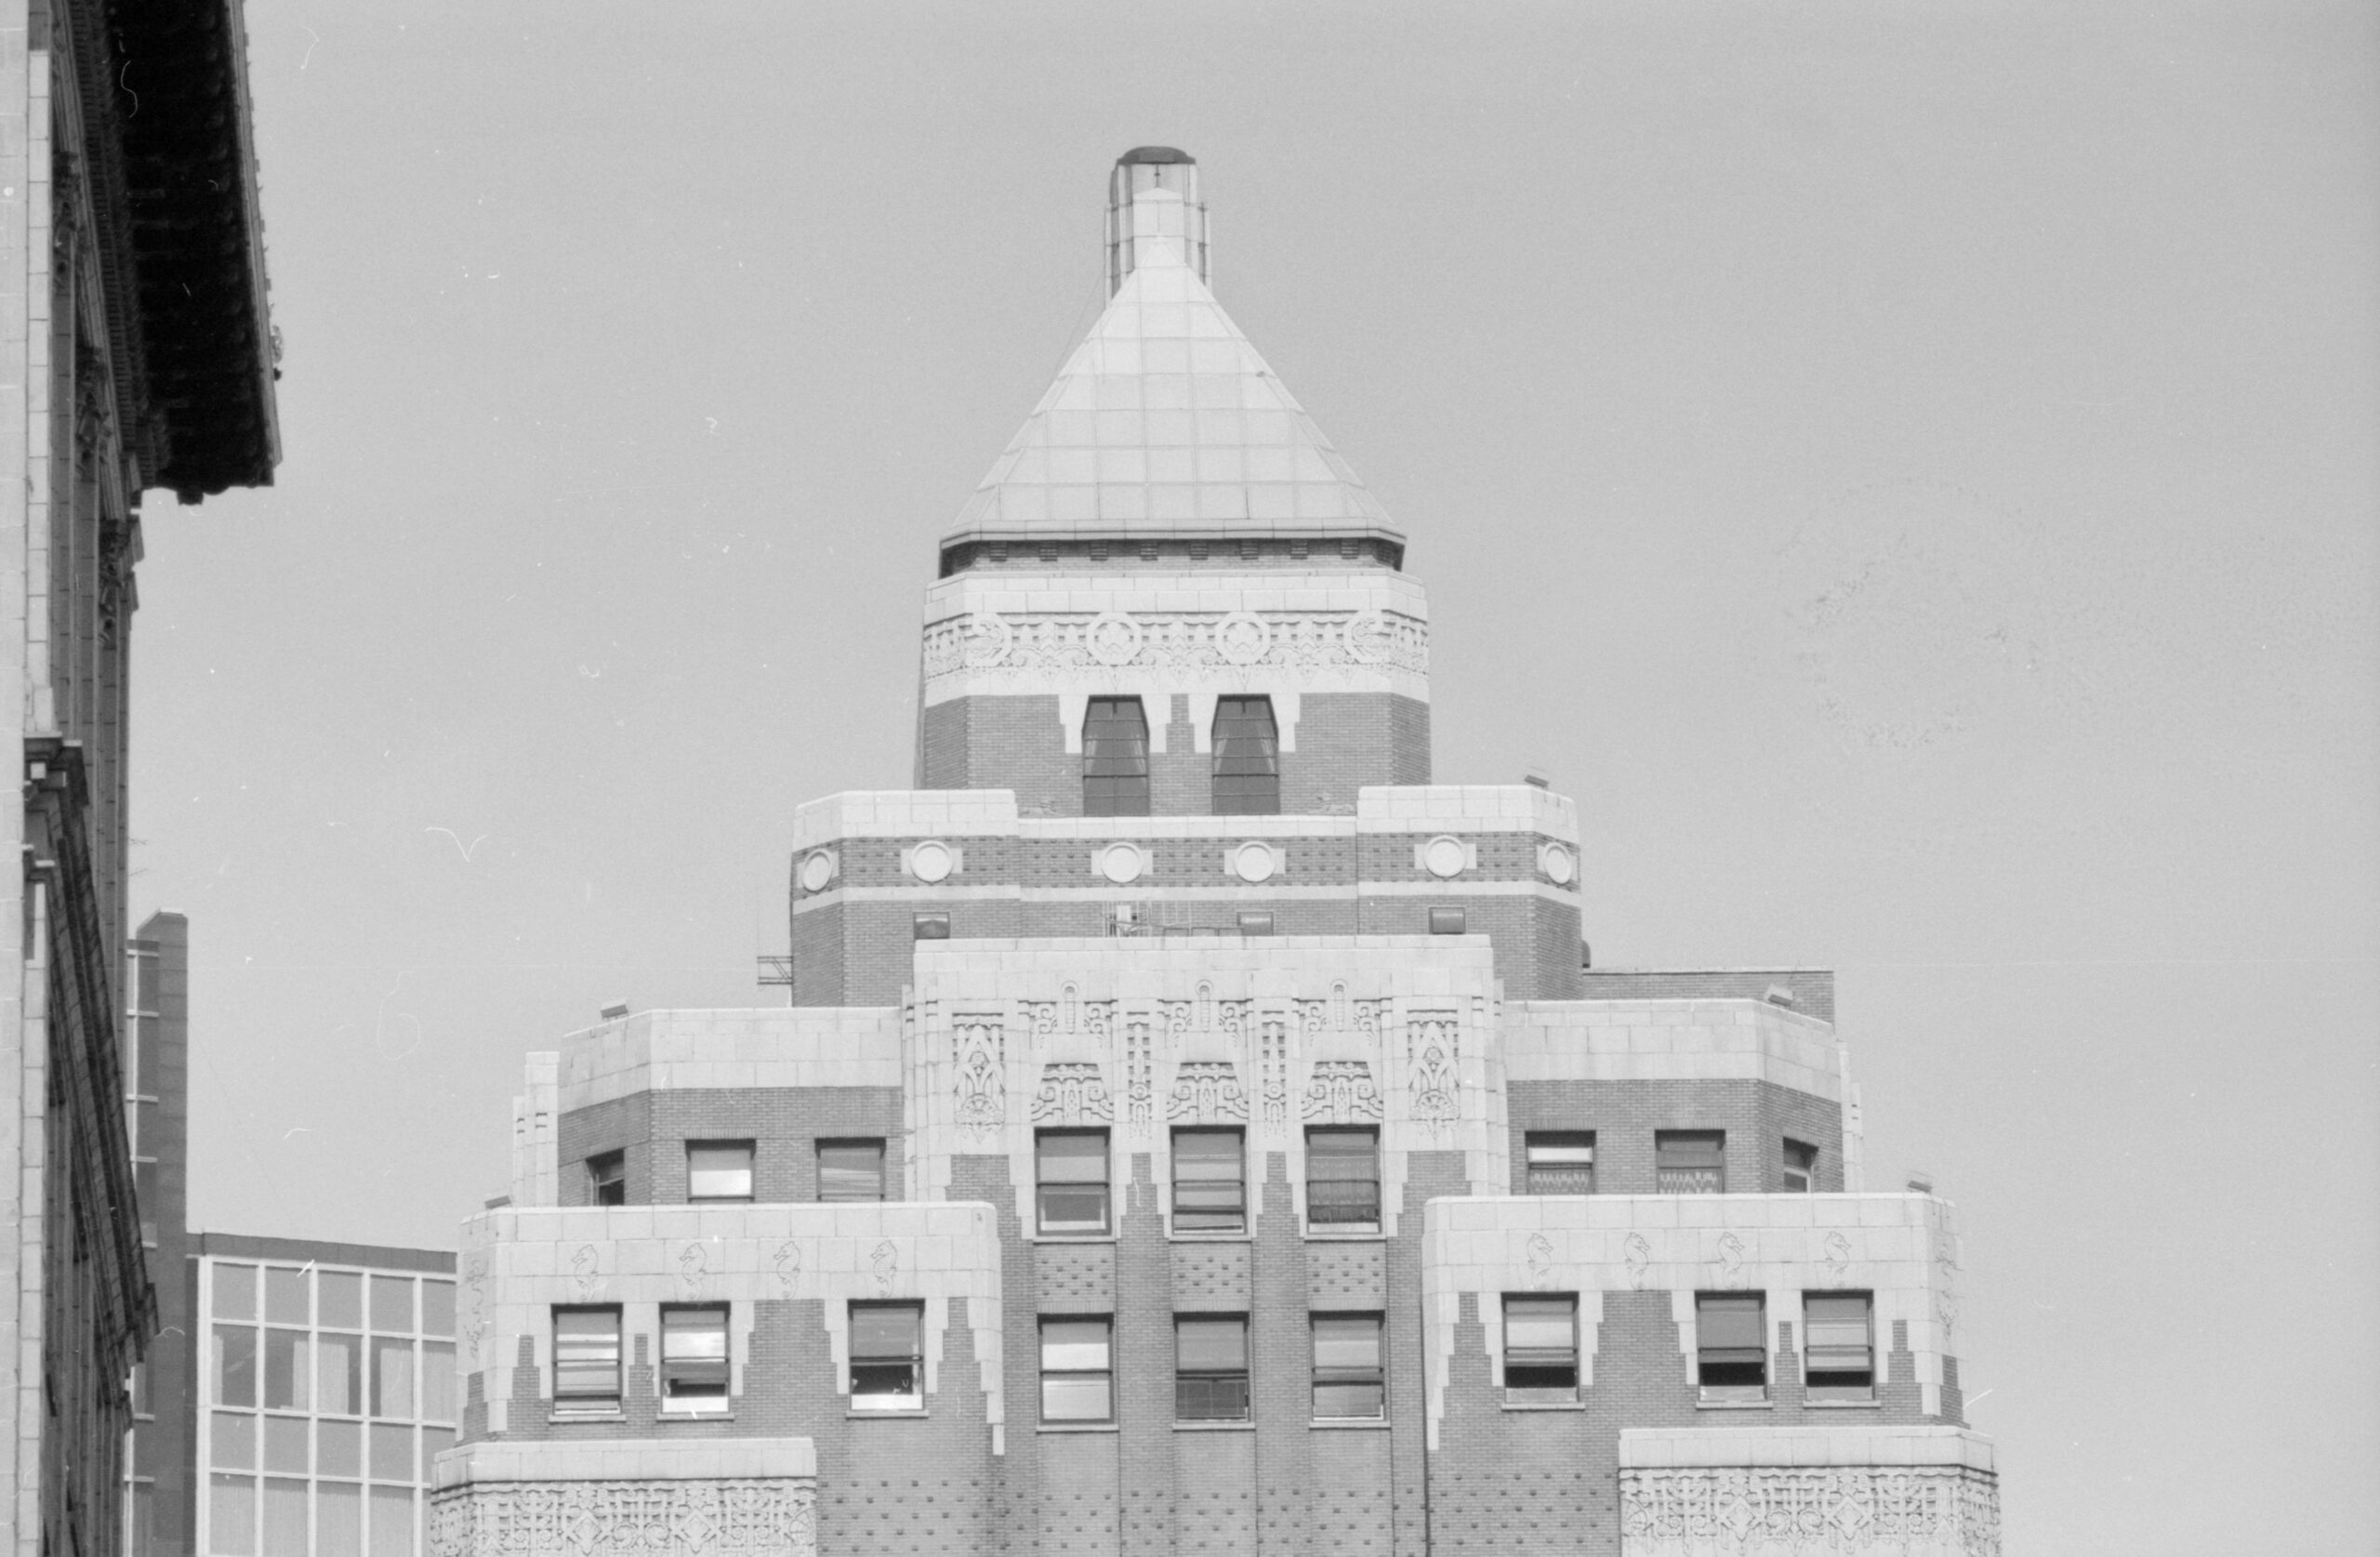 The top of the Marine Building as-built, and as seen in the 1970s. Reference code: COV-S644-: CVA 1095-13657